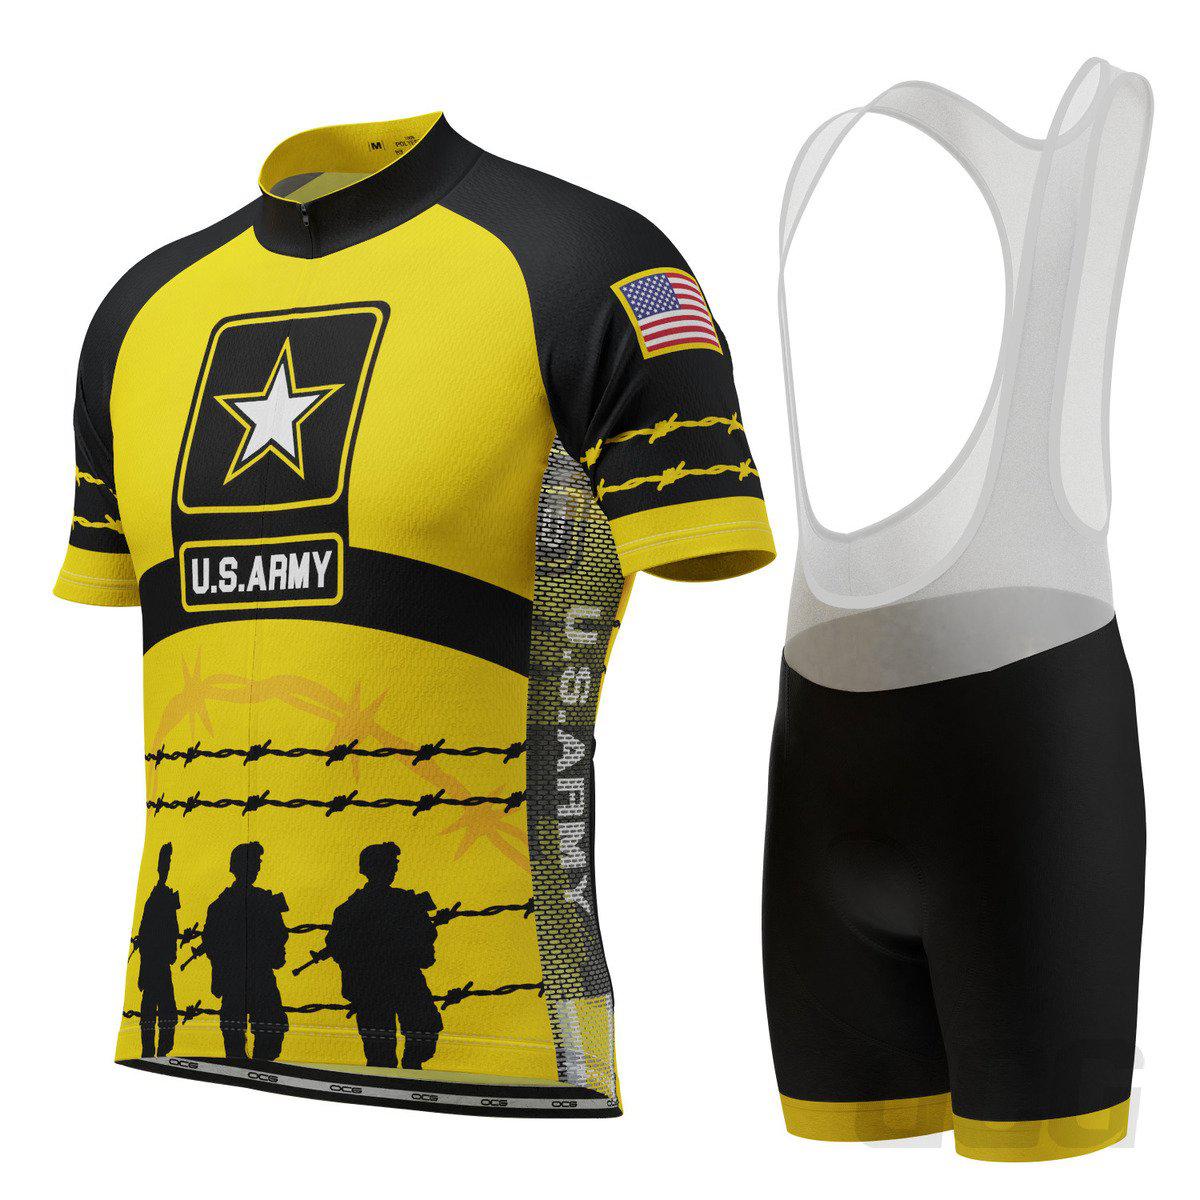 Men's USA Army Troops Pro-Band Short Sleeve Cycling Kit